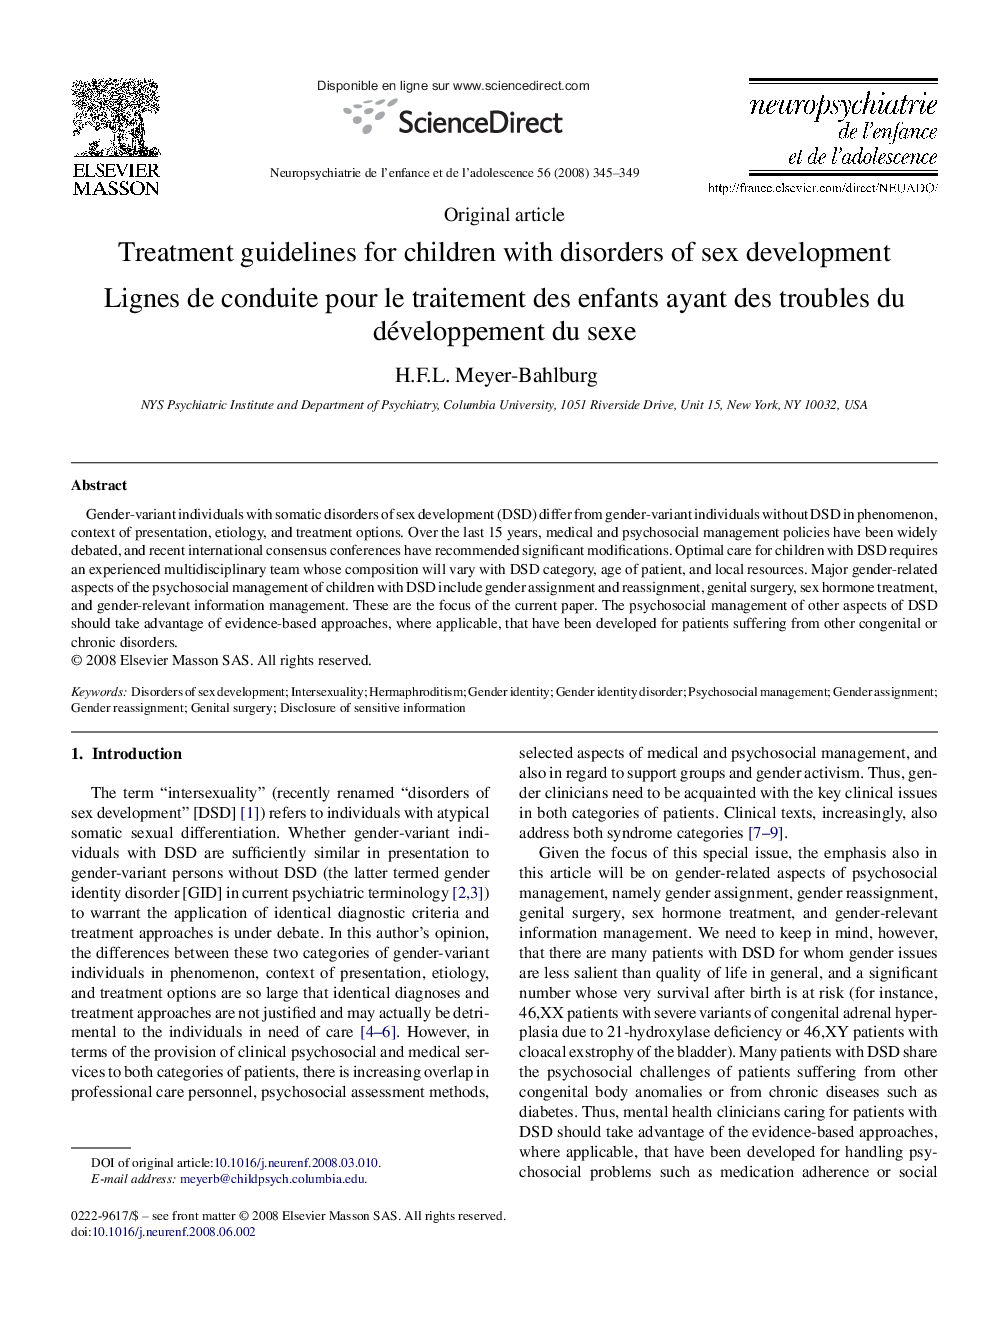 Treatment guidelines for children with disorders of sex development